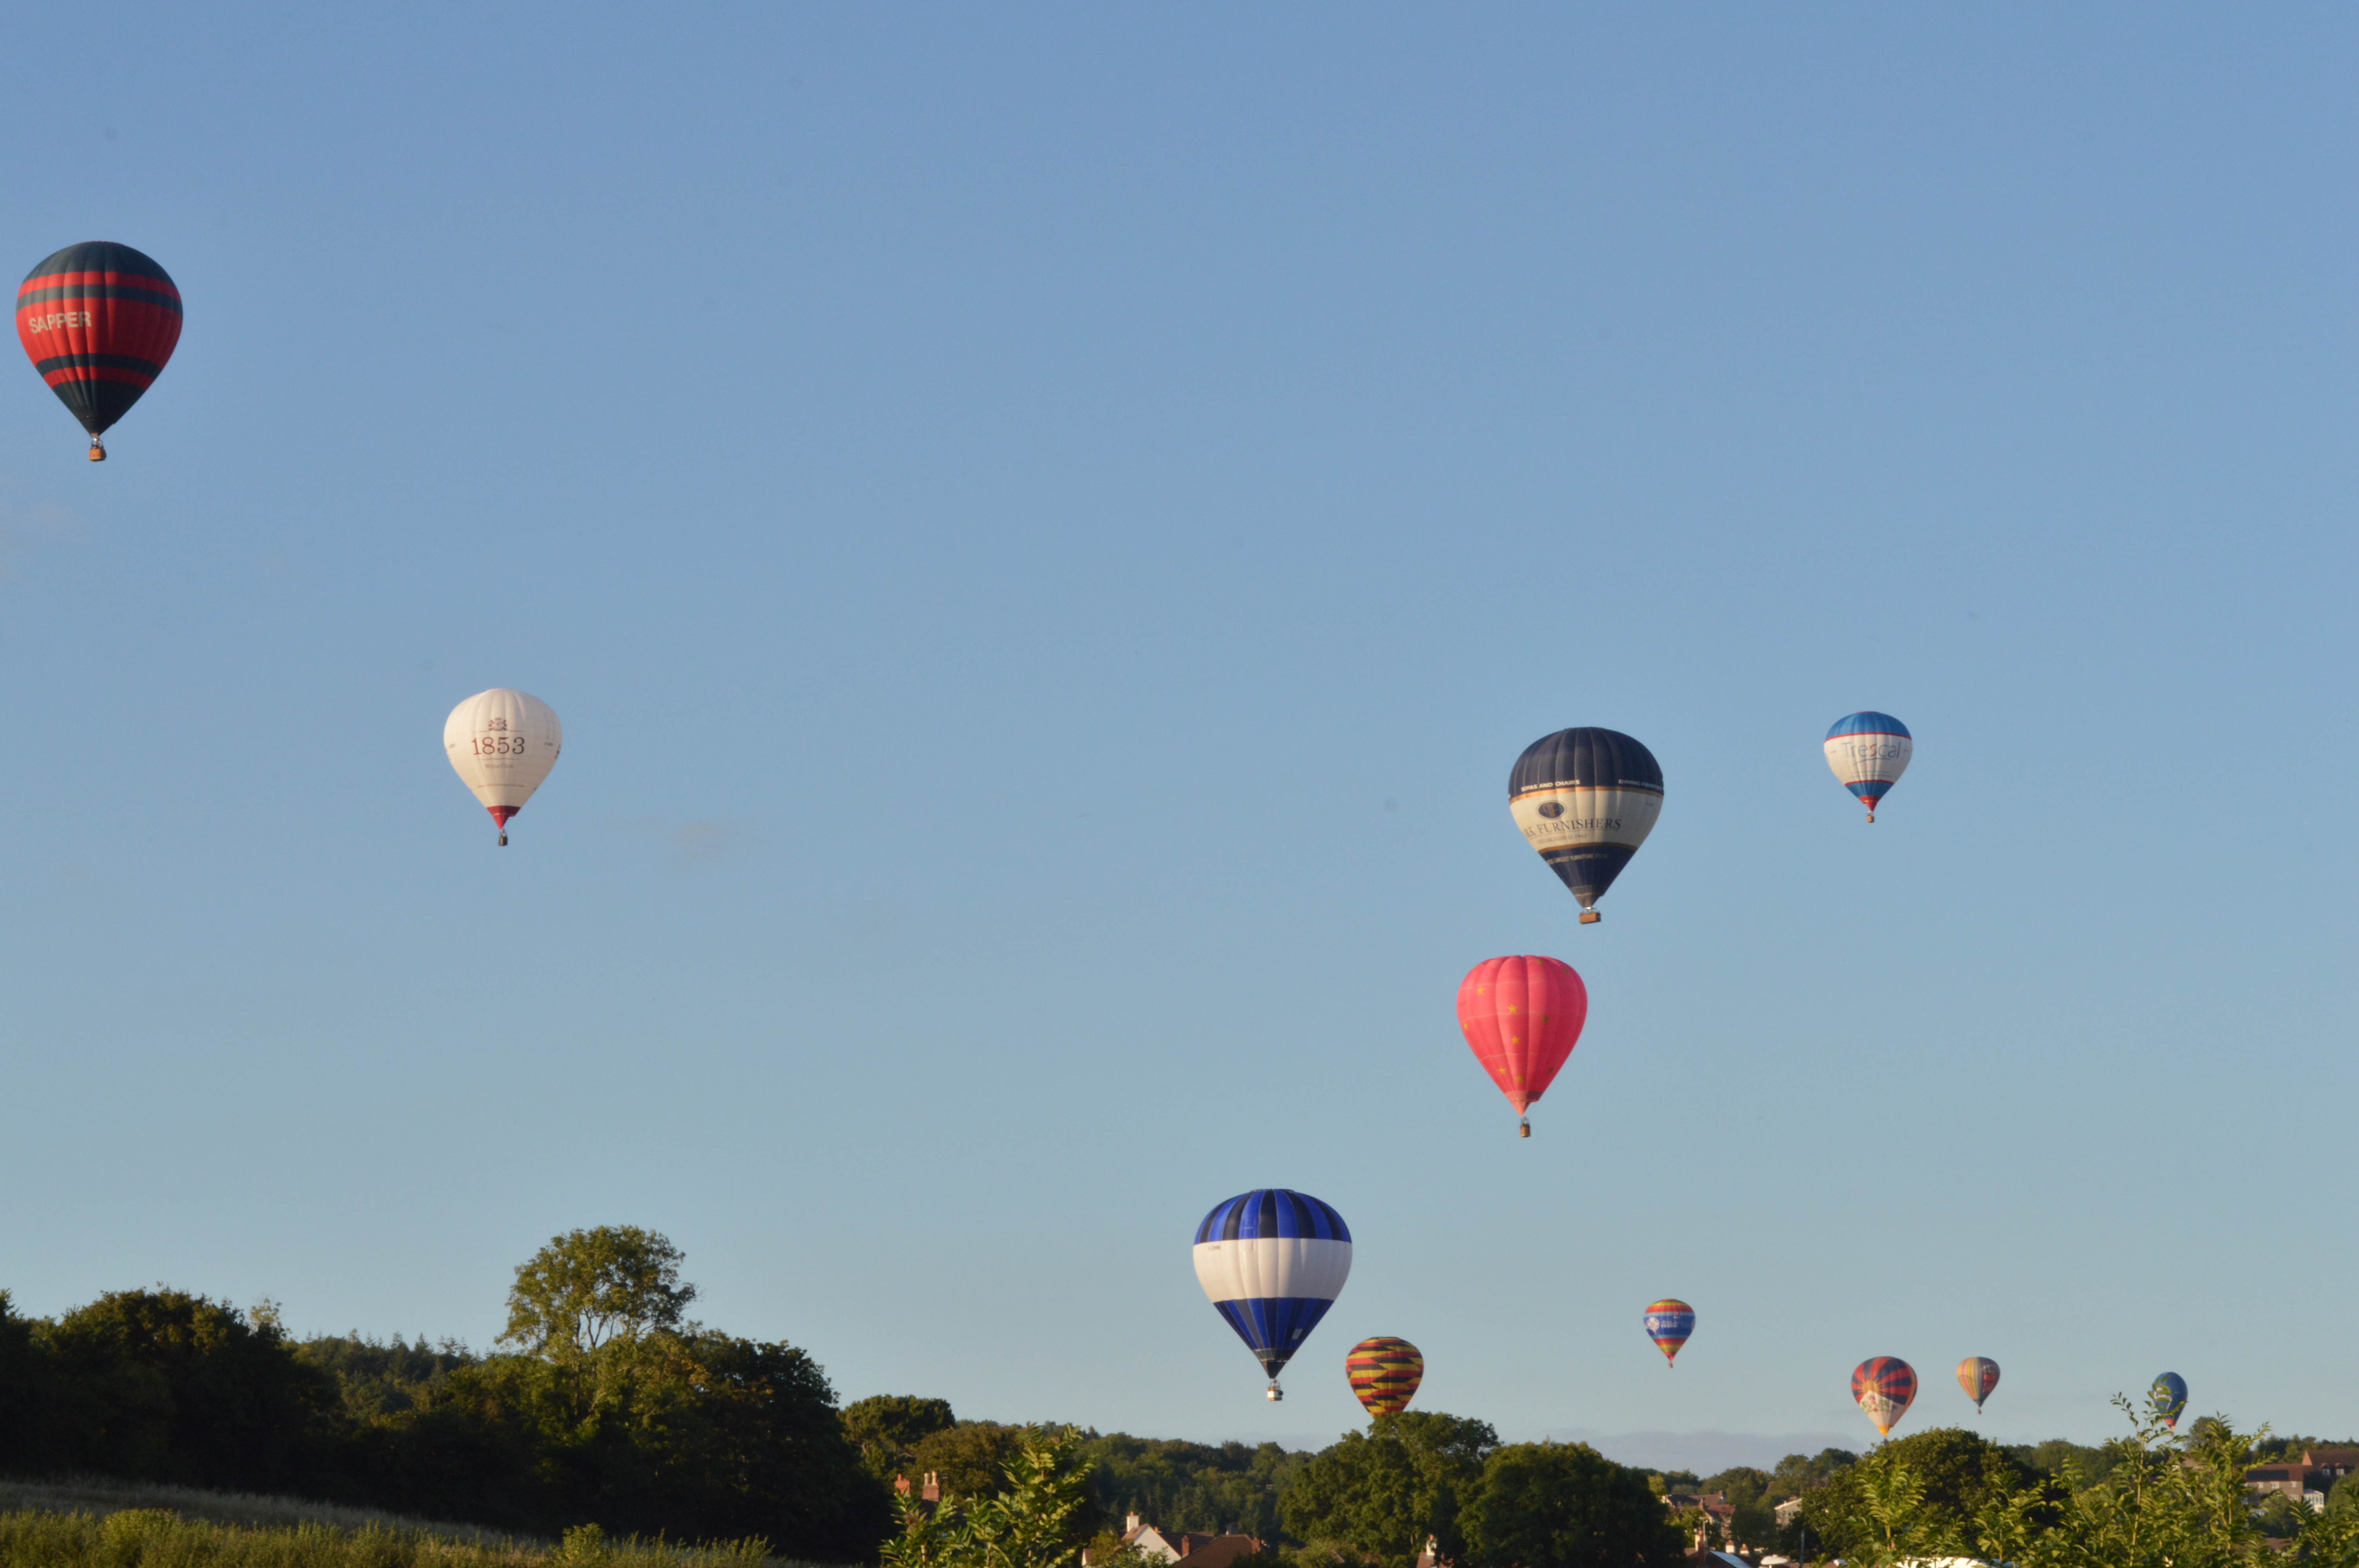 A picture from the Bristol International Balloon Fiesta